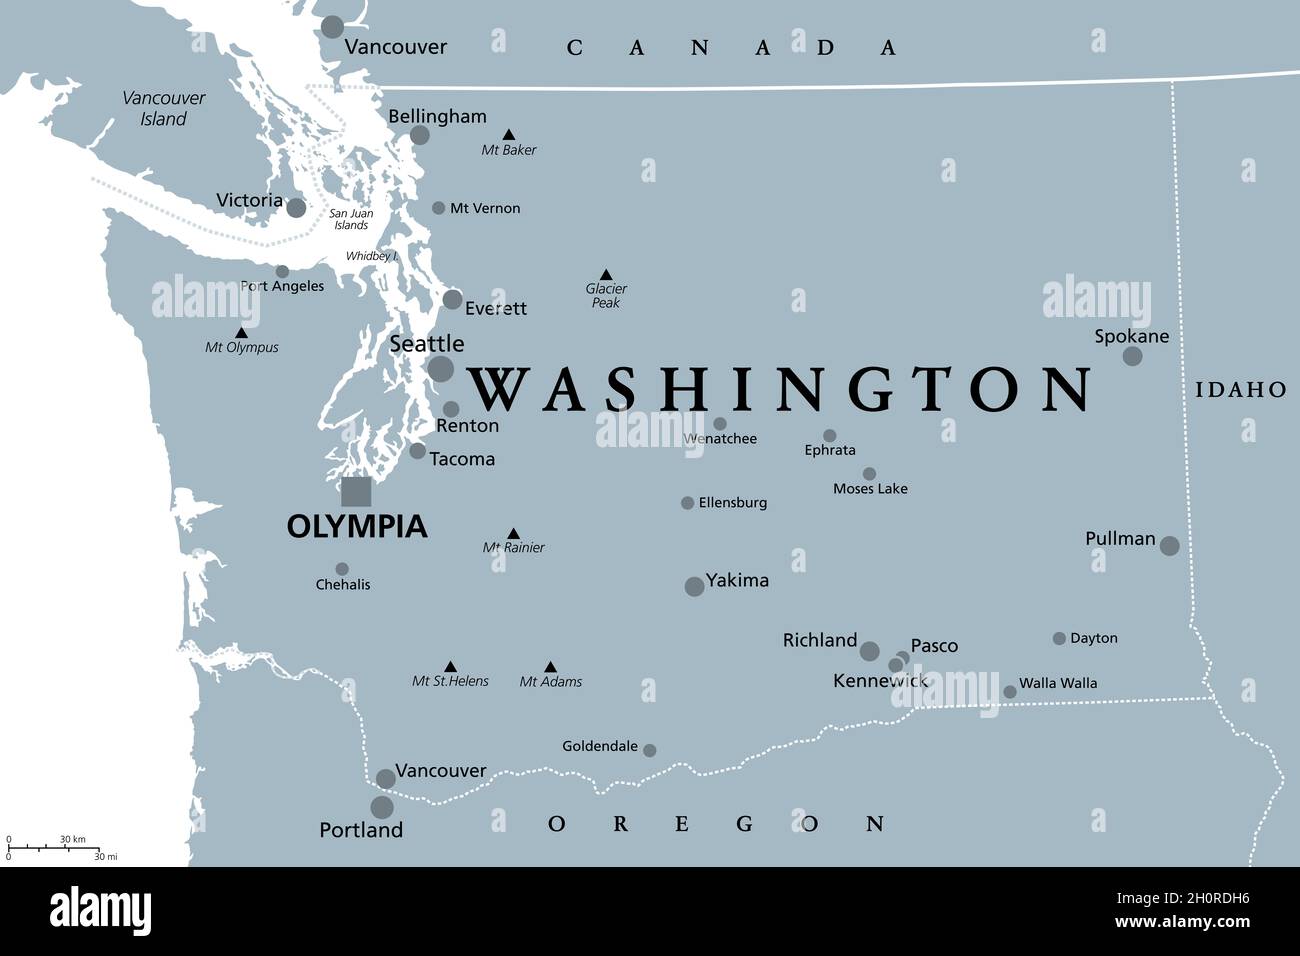 Washington, WA, gray political map, with capital Olympia. State in the Pacific Northwest region of the Western United States of America. Stock Photo